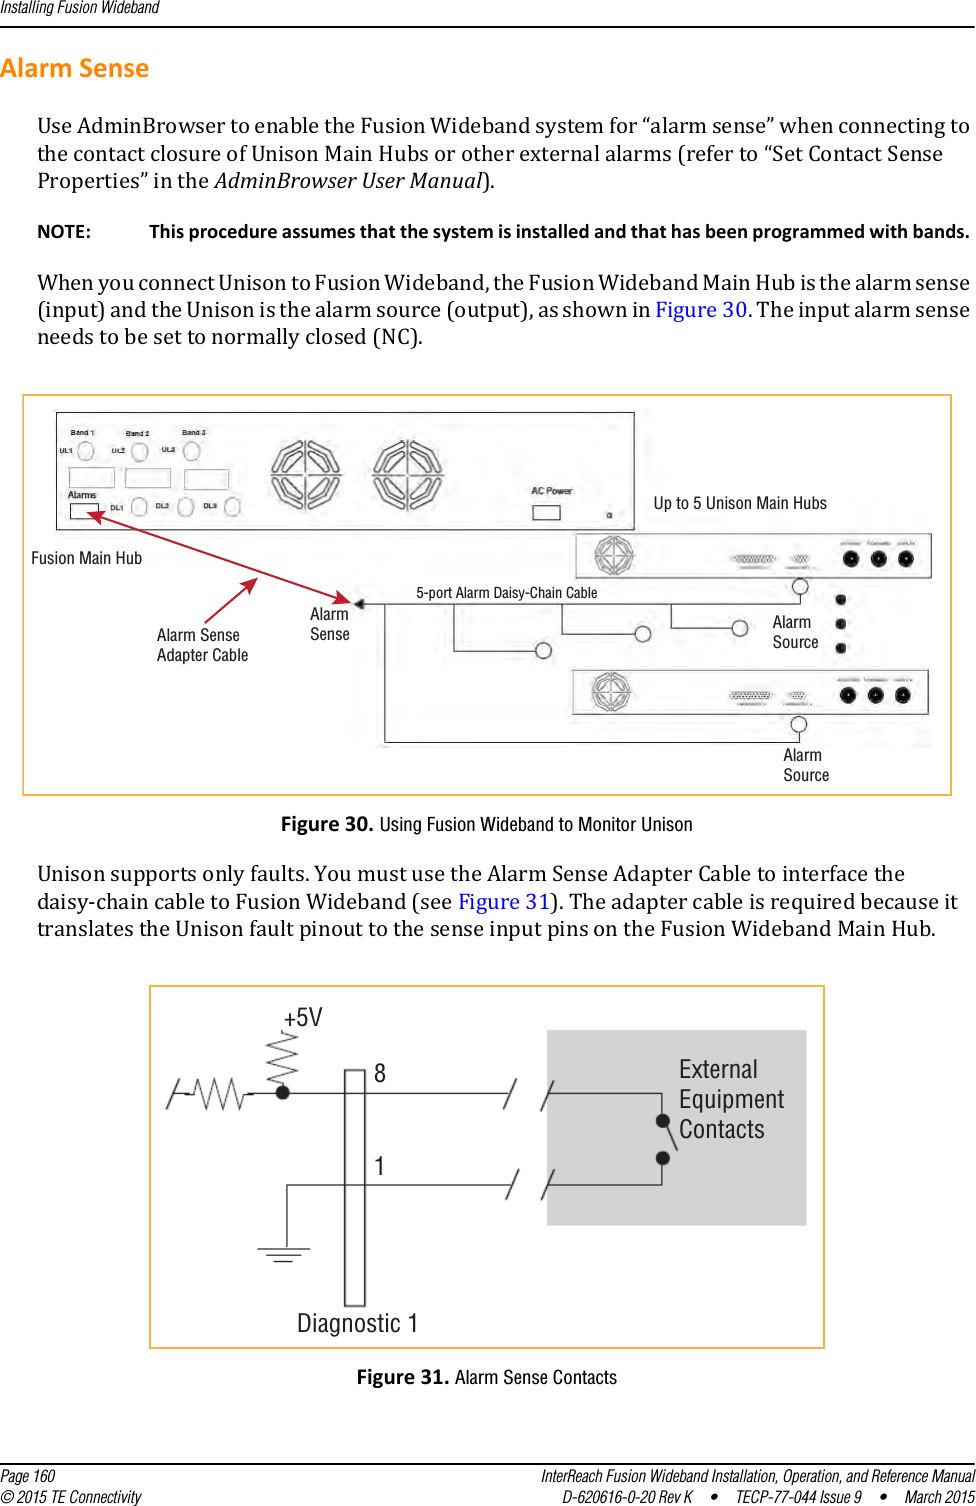 Installing Fusion Wideband  Page 160 InterReach Fusion Wideband Installation, Operation, and Reference Manual© 2015 TE Connectivity D-620616-0-20 Rev K  •  TECP-77-044 Issue 9  •  March 2015Alarm SenseUse AdminBrowser to enable the Fusion Wideband system for “alarm sense” when connecting to the contact closure of Unison Main Hubs or other external alarms (refer to “Set Contact Sense Properties” in the AdminBrowser User Manual).NOTE: This procedure assumes that the system is installed and that has been programmed with bands. When you connect Unison to Fusion Wideband, the Fusion Wideband Main Hub is the alarm sense (input) and the Unison is the alarm source (output), as shown in Figure 30. The input alarm sense needs to be set to normally closed (NC).Figure 30. Using Fusion Wideband to Monitor UnisonUnison supports only faults. You must use the Alarm Sense Adapter Cable to interface the daisy-chain cable to Fusion Wideband (see Figure 31). The adapter cable is required because it translates the Unison fault pinout to the sense input pins on the Fusion Wideband Main Hub.Figure 31. Alarm Sense Contacts5-port Alarm Daisy-Chain CableUp to 5 Unison Main HubsAlarmSourceAlarmSourceAlarmSenseFusion Main HubAlarm SenseAdapter Cable+5V81ExternalEquipmentContactsDiagnostic 1